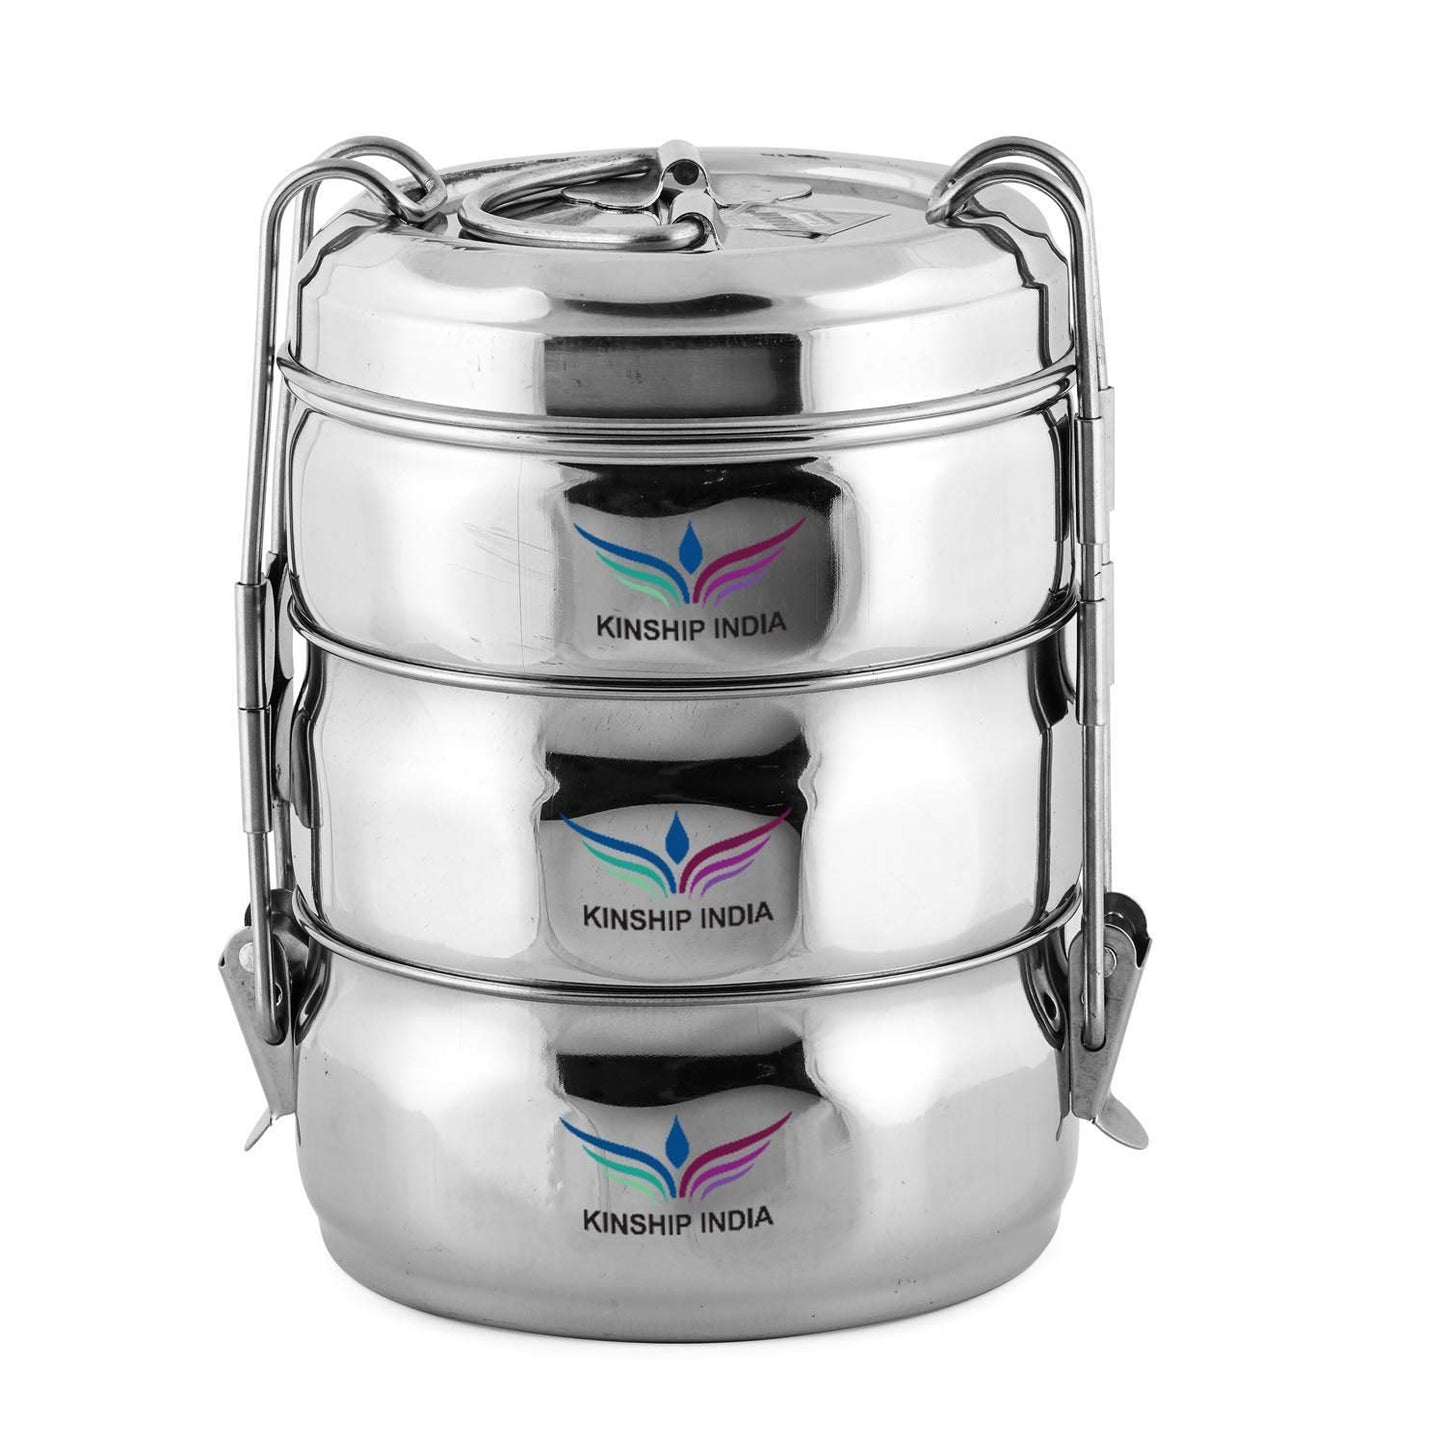 Stainless Steel 3 Tier Cherry Lunch Box 11 Cm